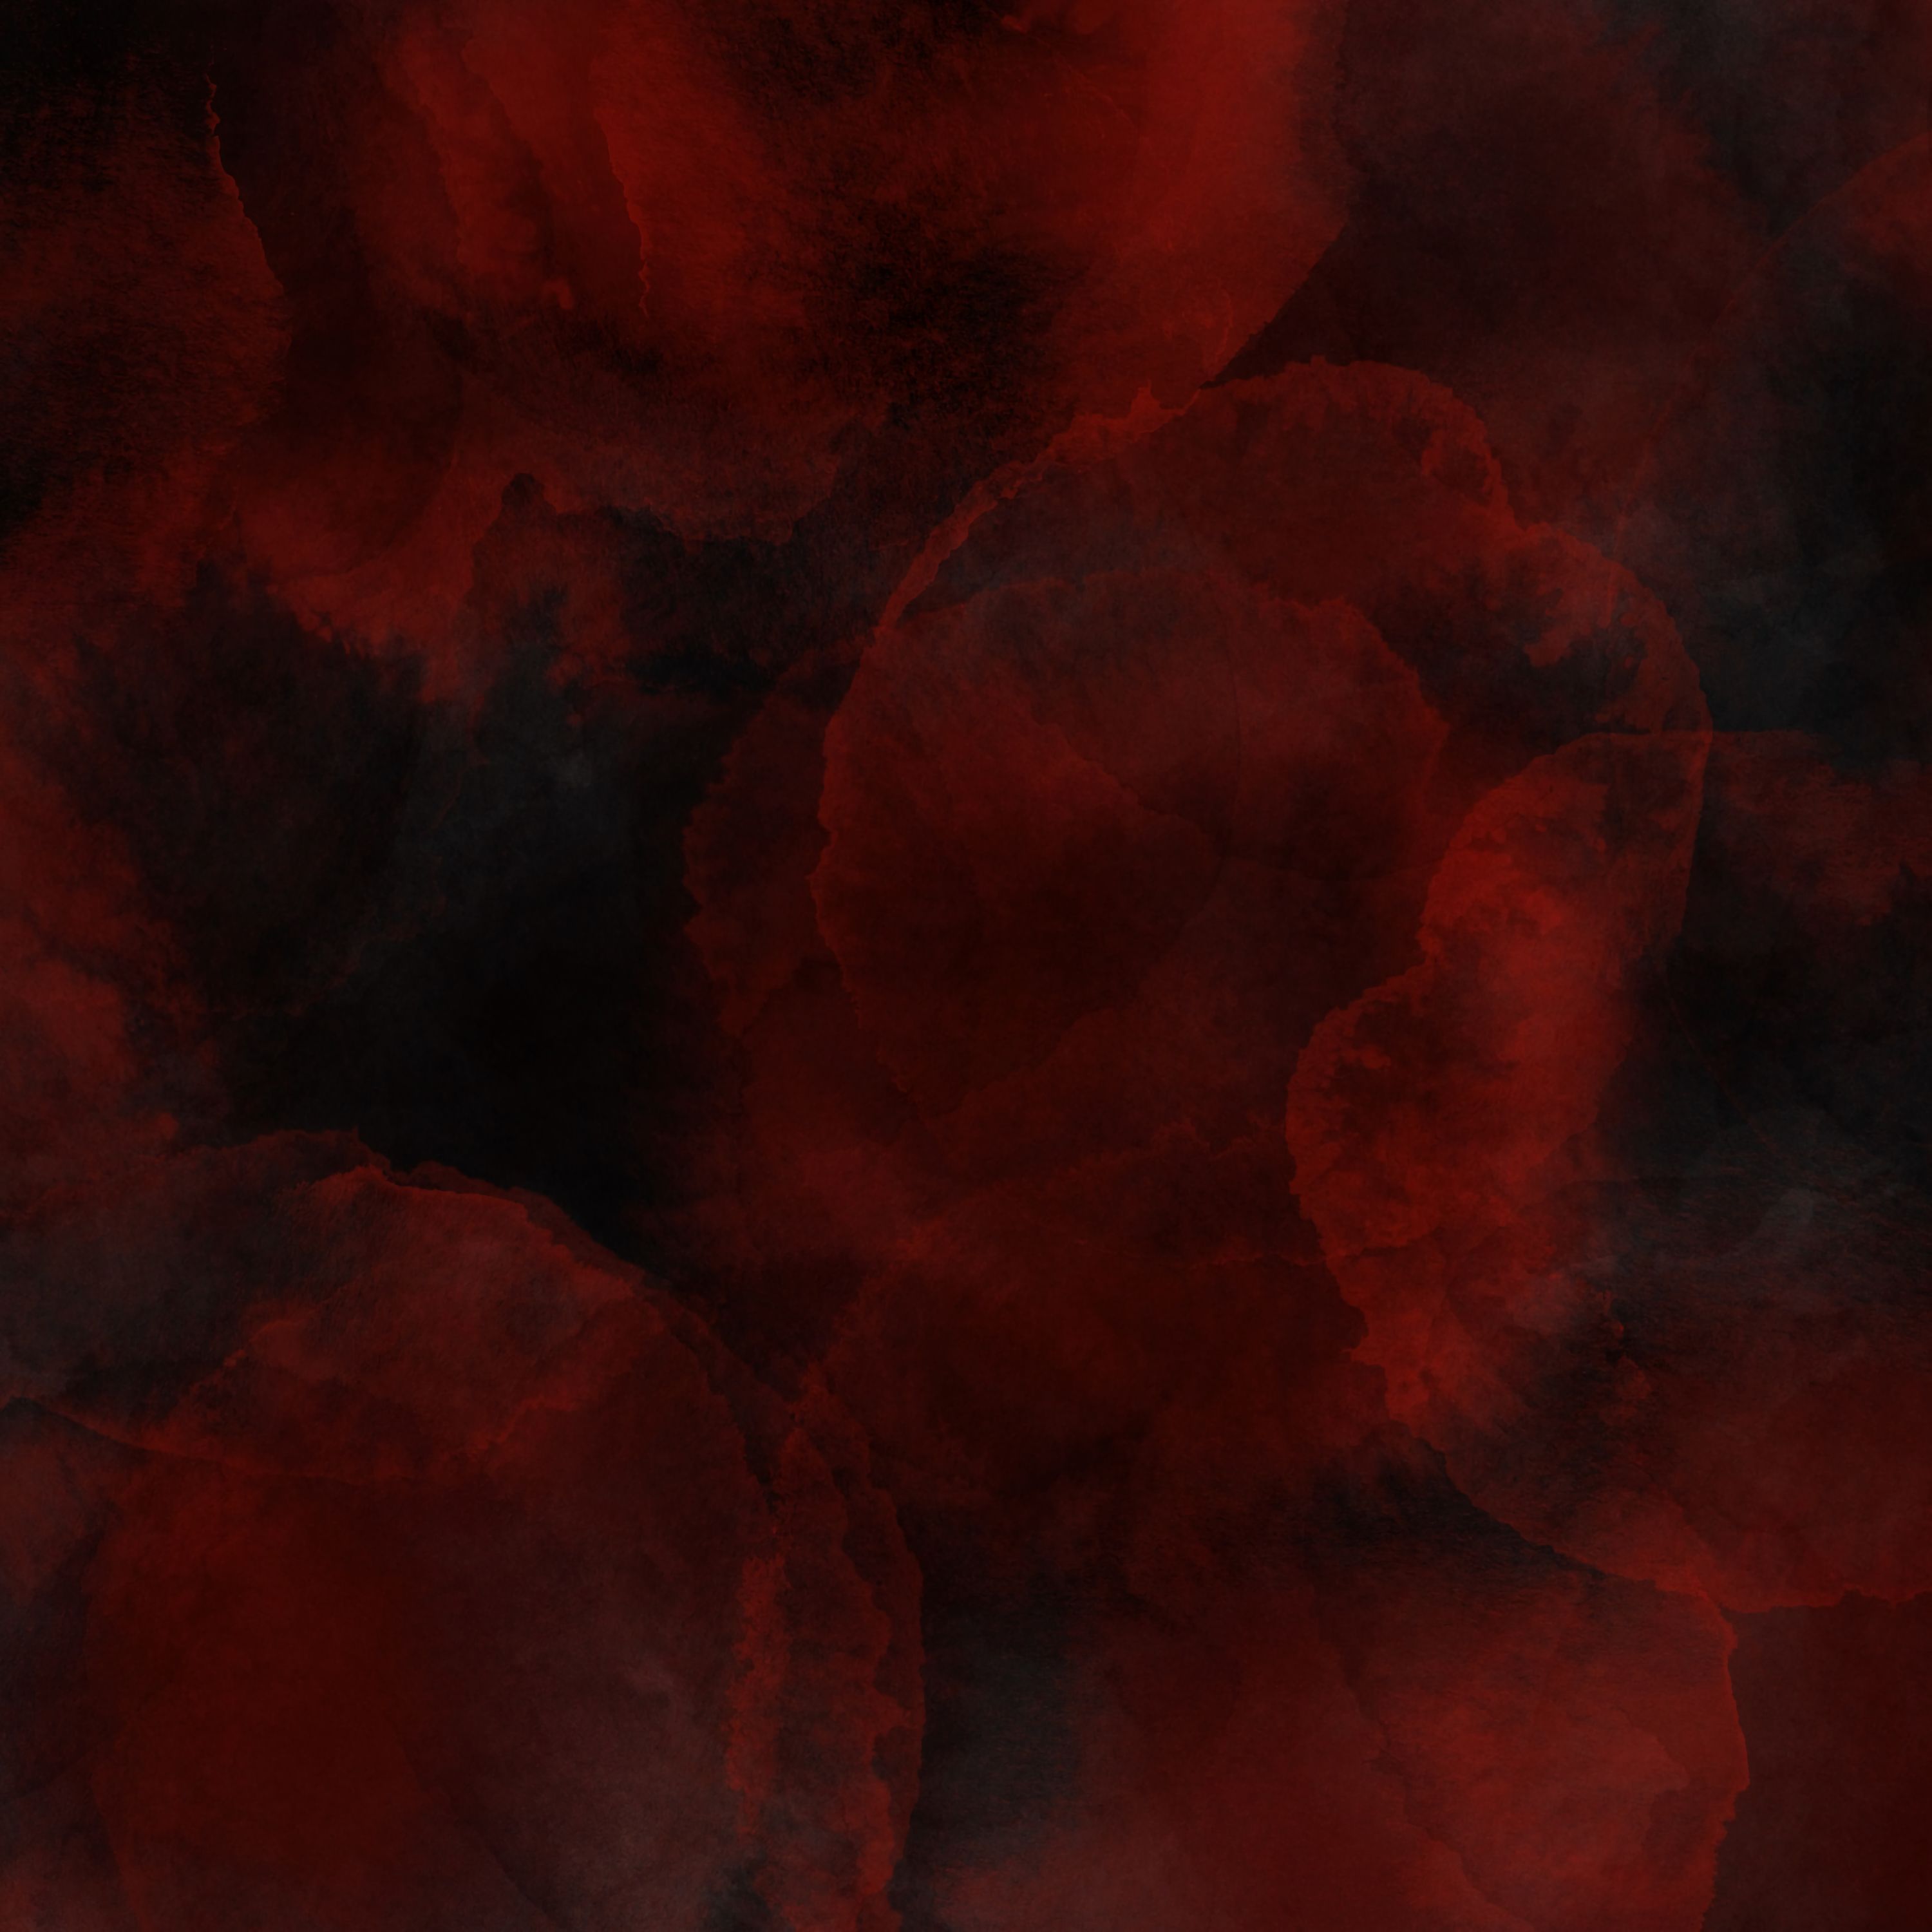 88961 free download Red wallpapers for phone, stains, spots, black, textures Red images and screensavers for mobile